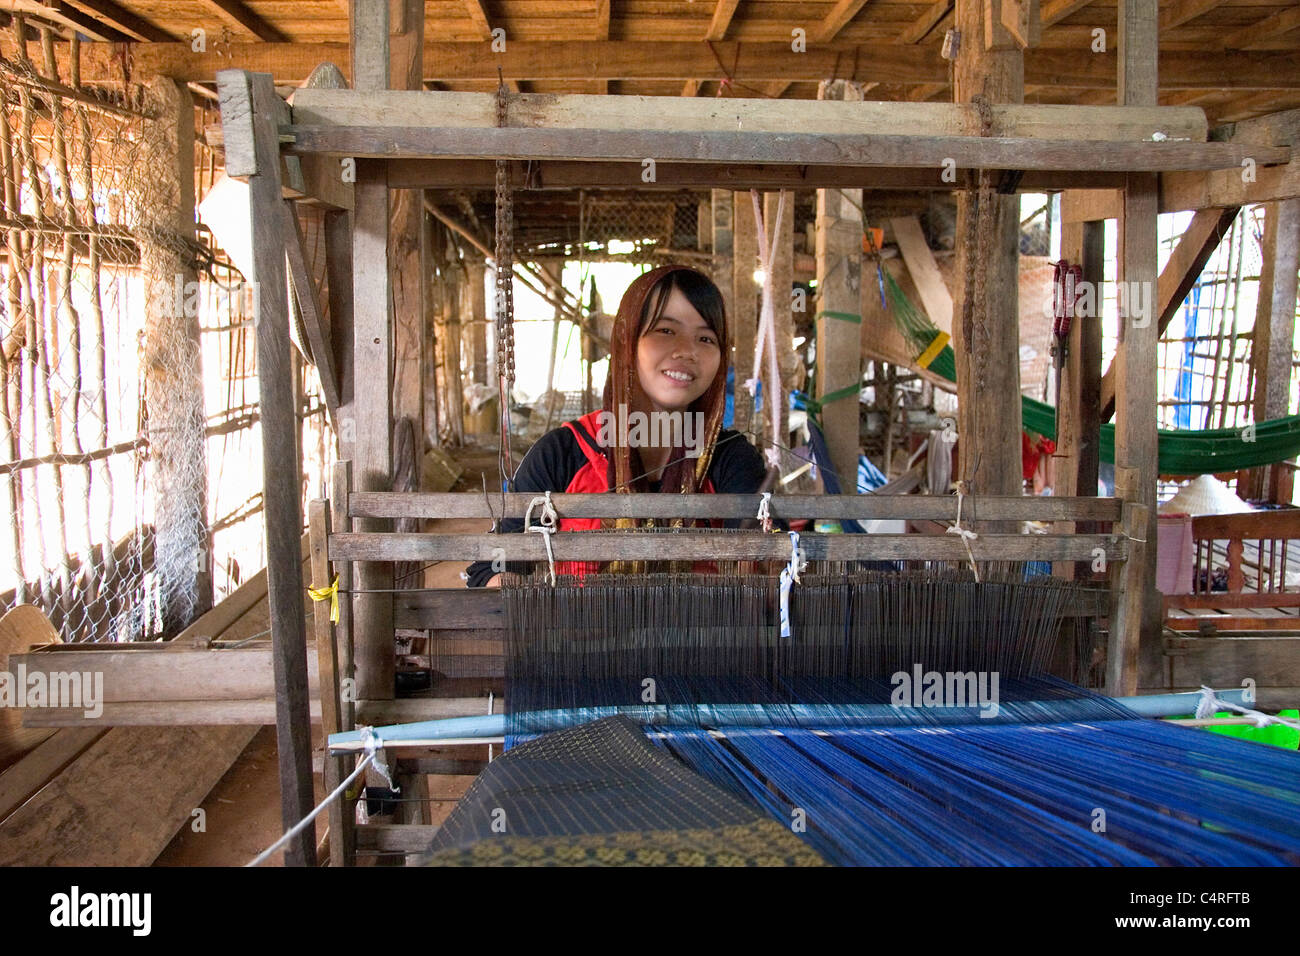 A young girl at work weaving on a loom, Cambodia Stock Photo